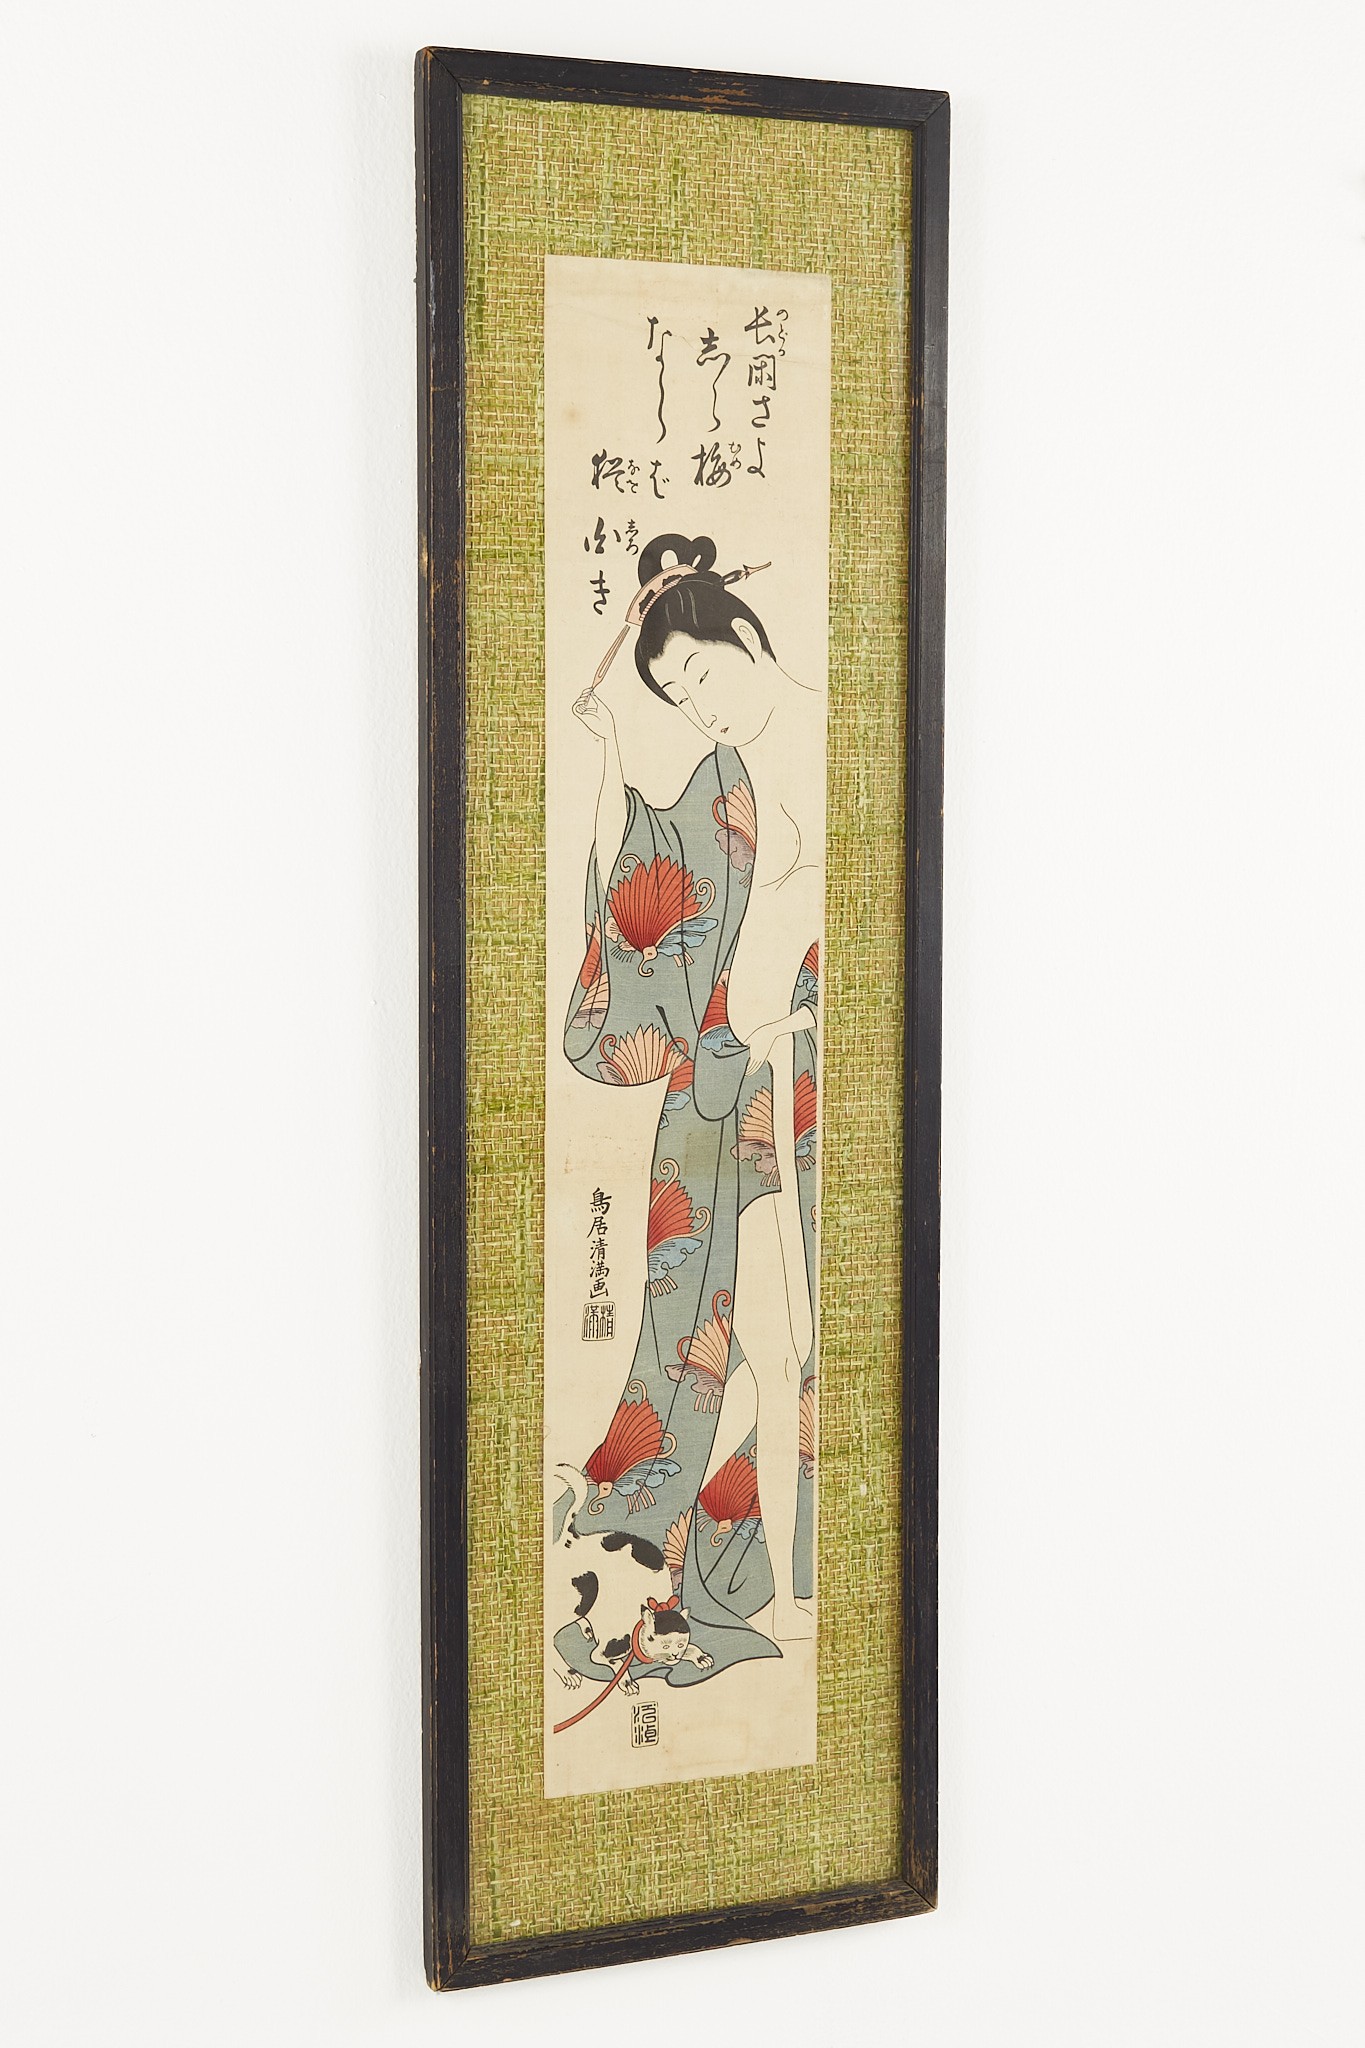 Japanese Woman in Kimono with Cat Art